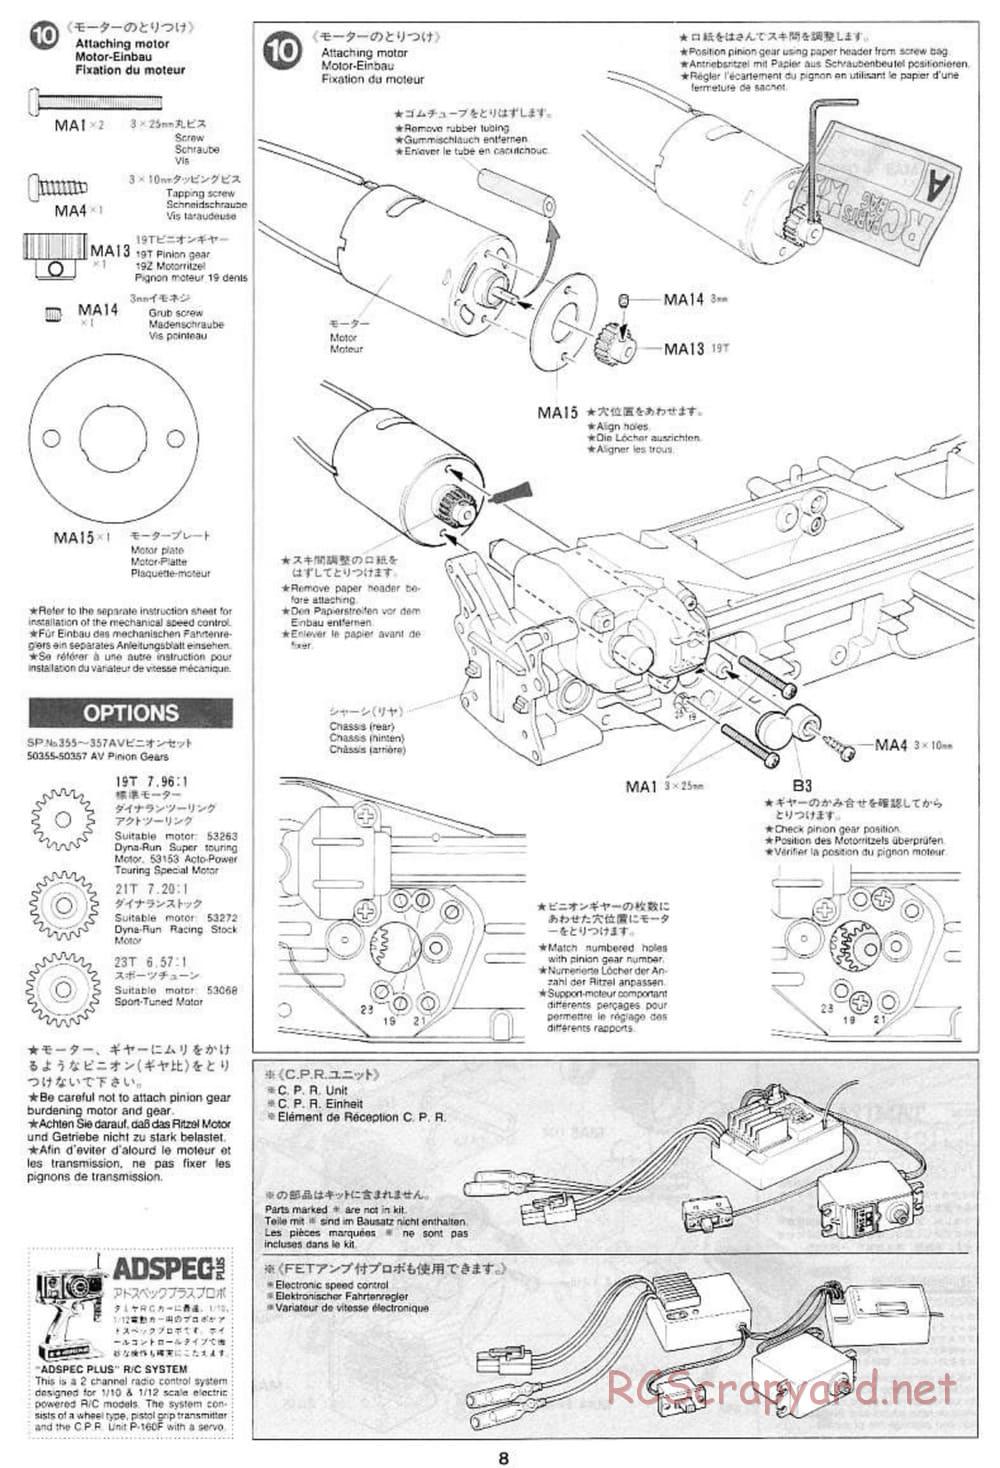 Tamiya - Pennzoil Nismo GT-R - TL-01 Chassis - Manual - Page 8